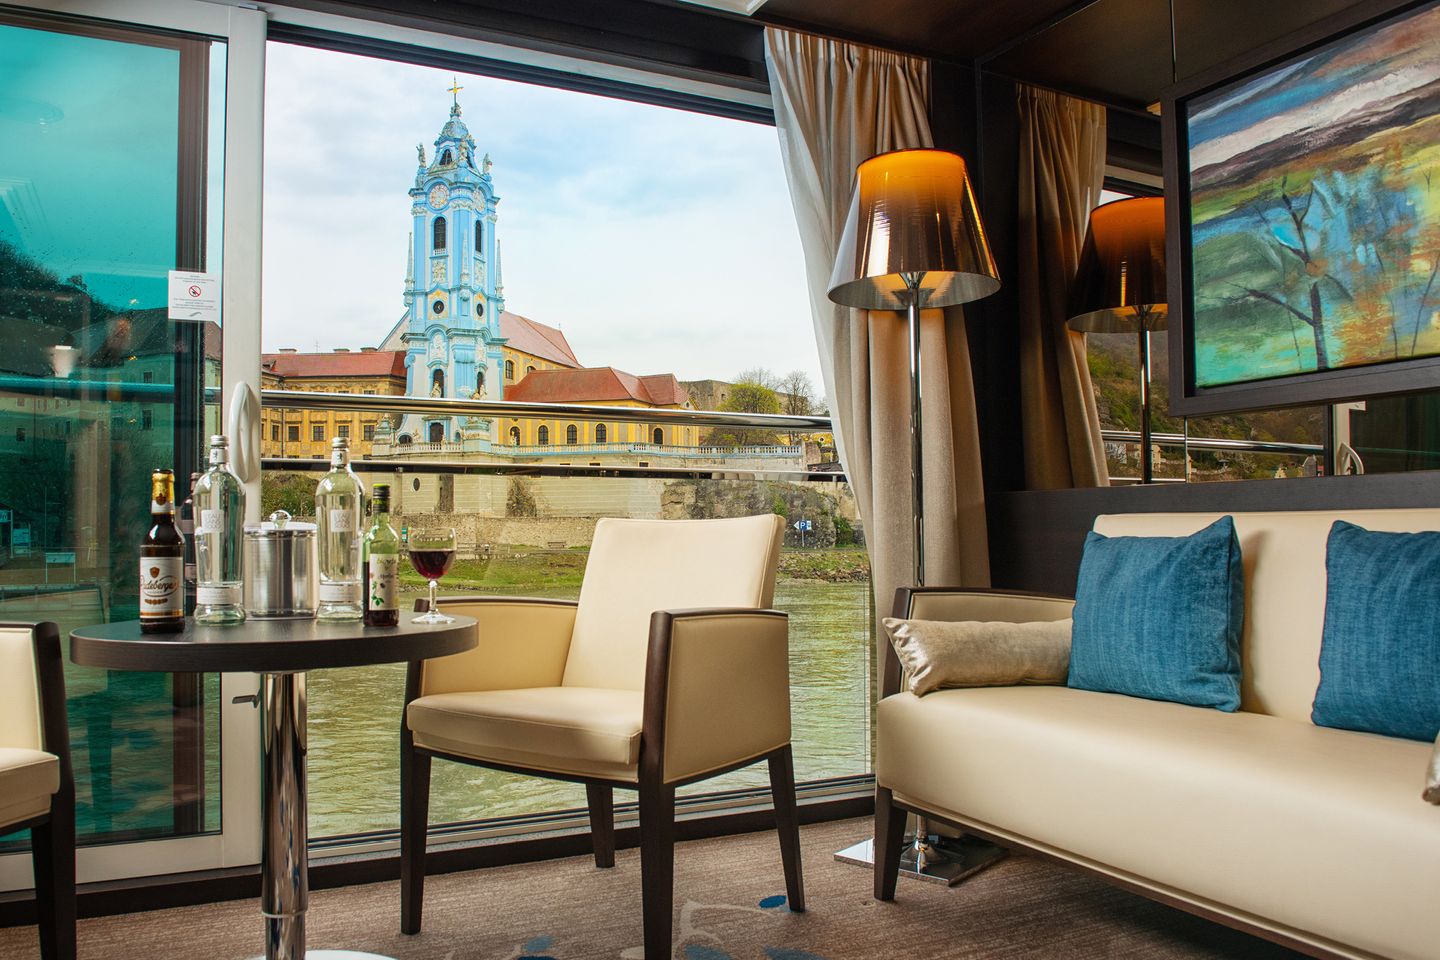 The Blue Danube Discovery With 2 Nights In Budapest